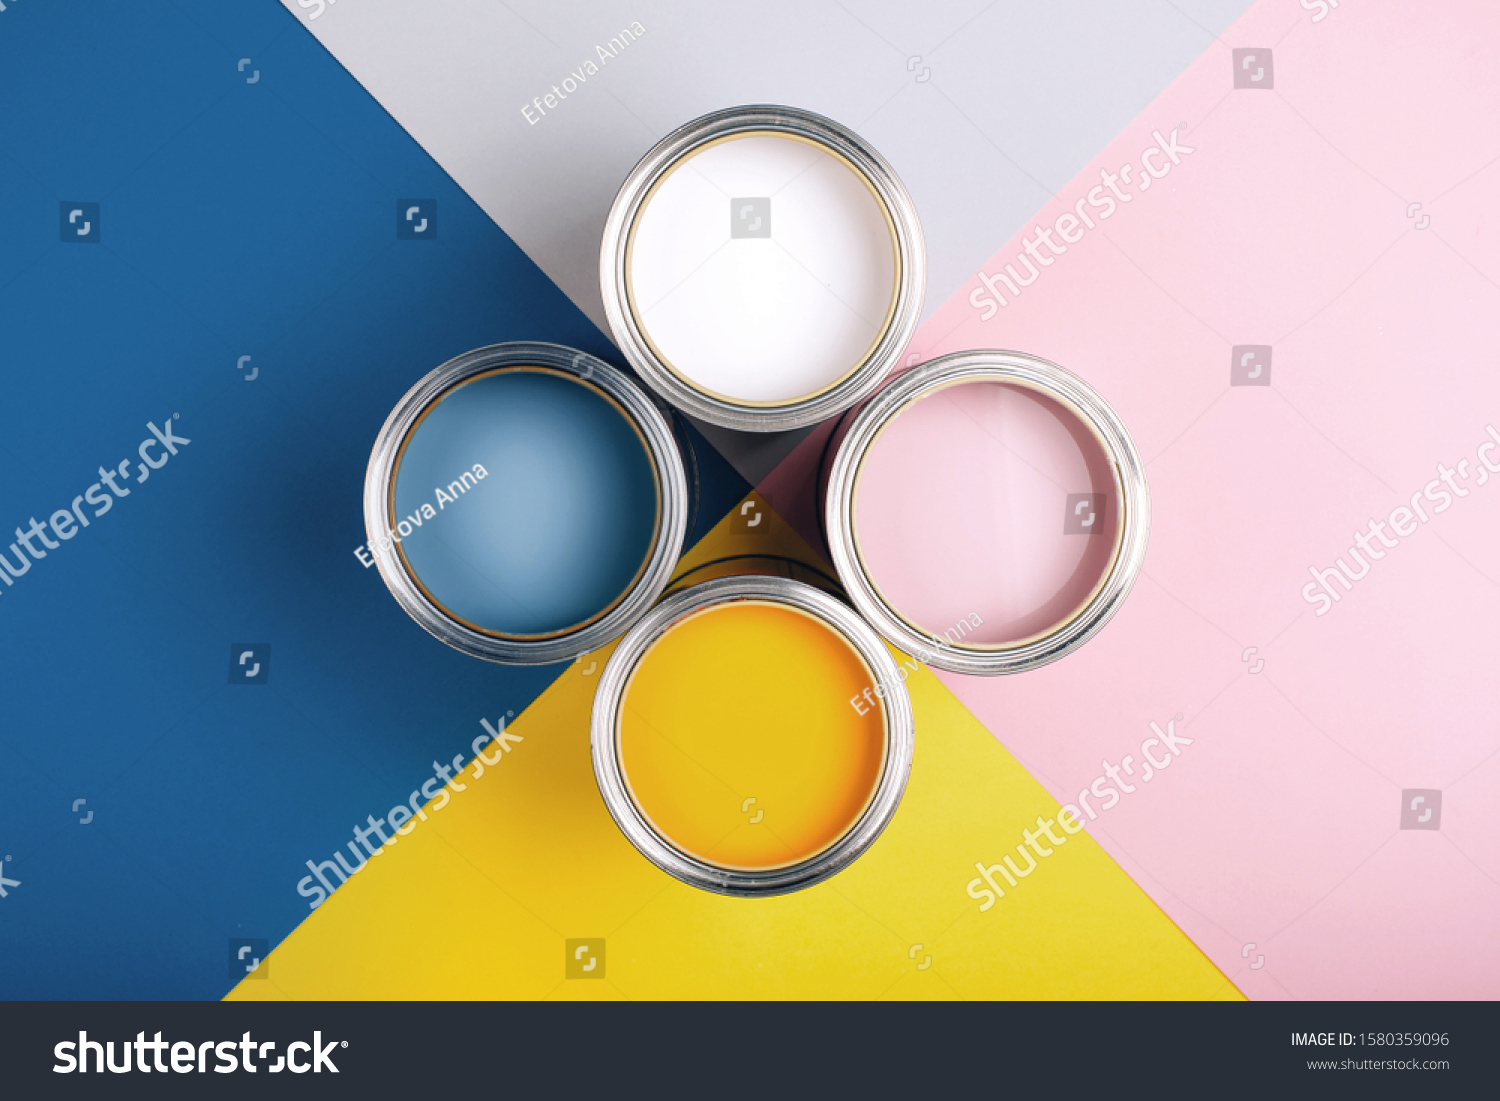 Four open cans of paint on bright symmetry background. Yellow, white, pink, blue colors of paint. Place for text. Renovation concept. #1580359096